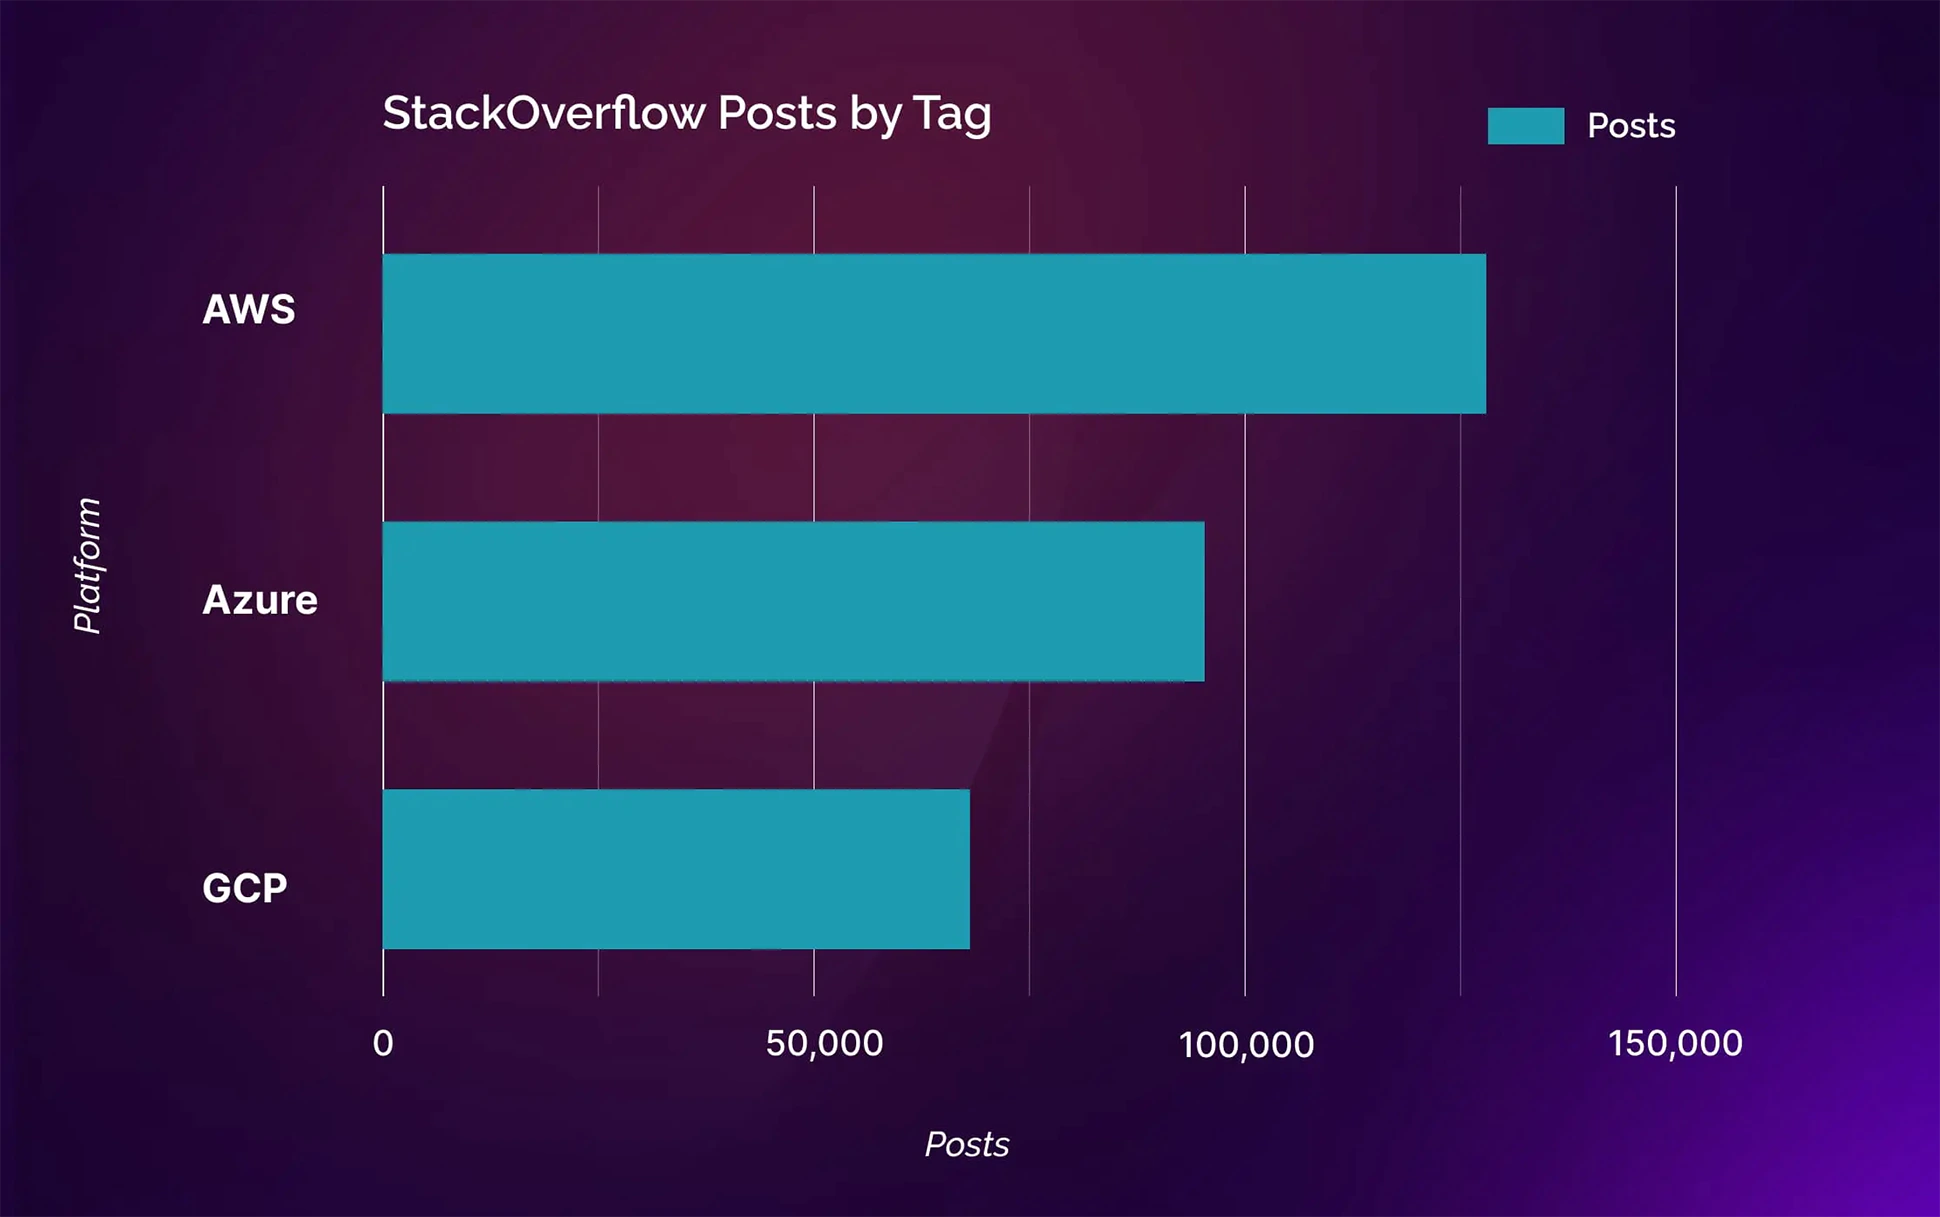 StackOverflow Posts by Tag (GCP, AWS, Azure)